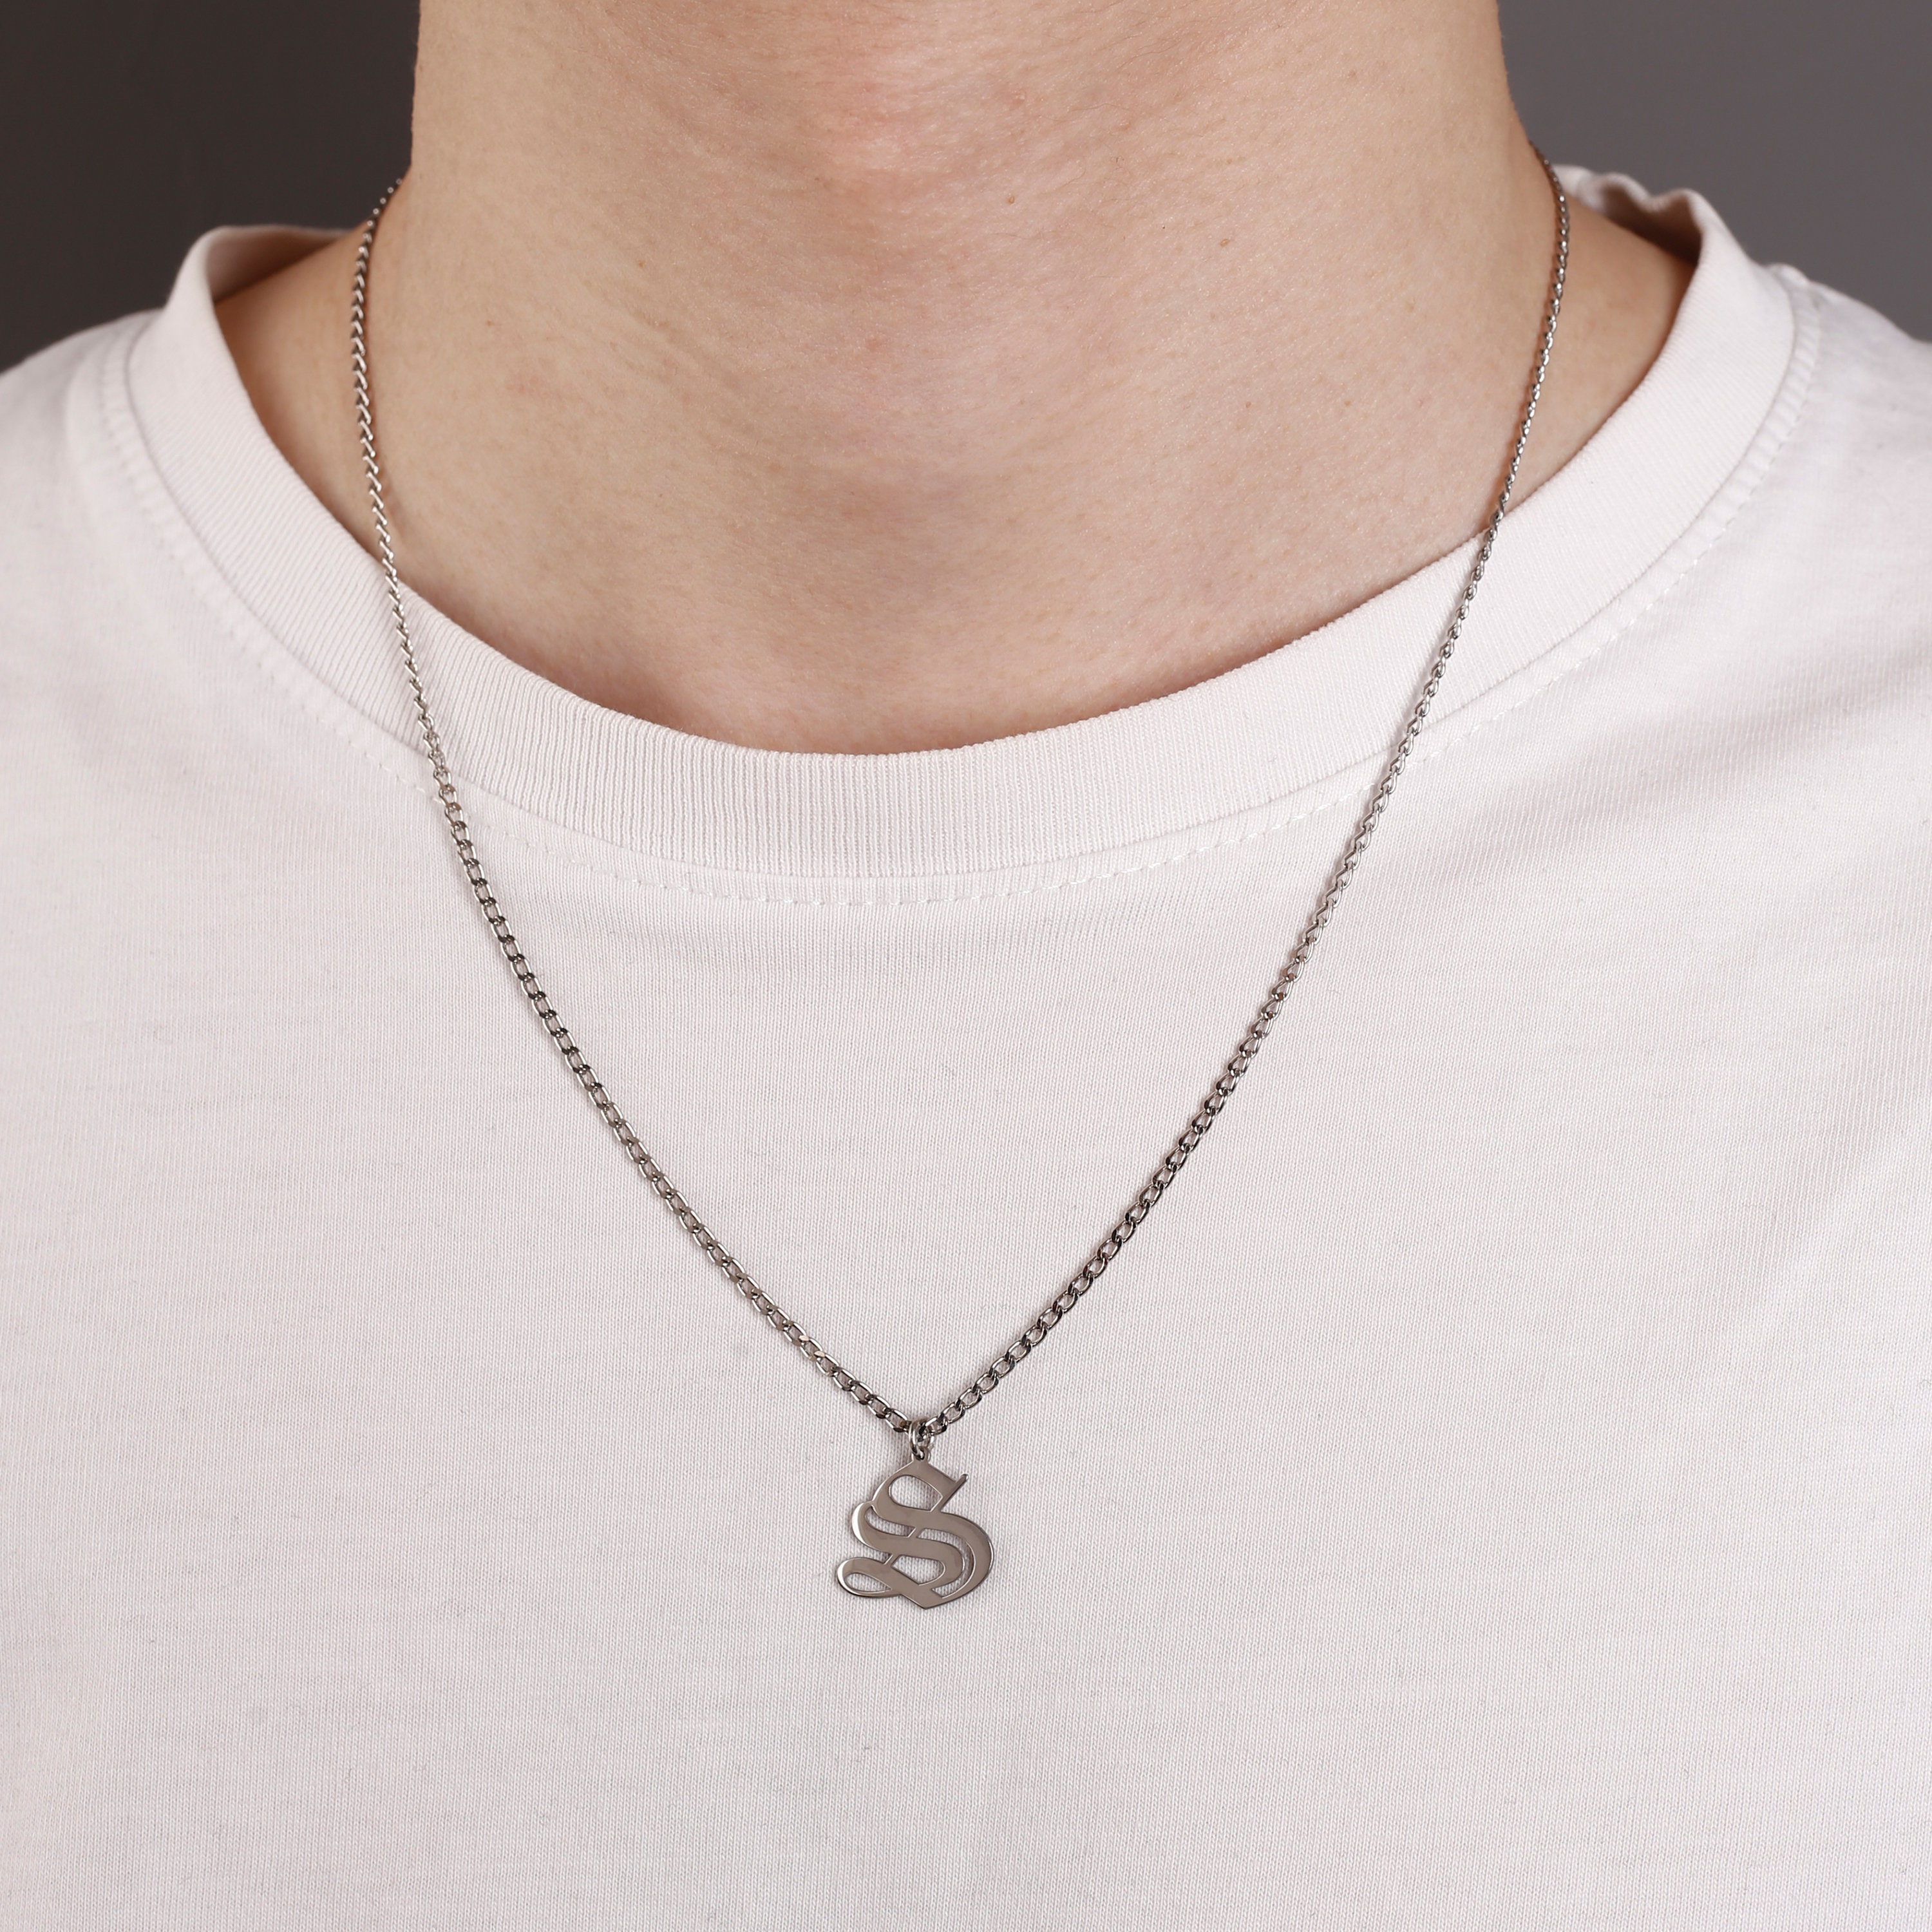 initials Pendant in Sterling Silver, Optional Engraved Back & Necklace Chain, Mens Birthday